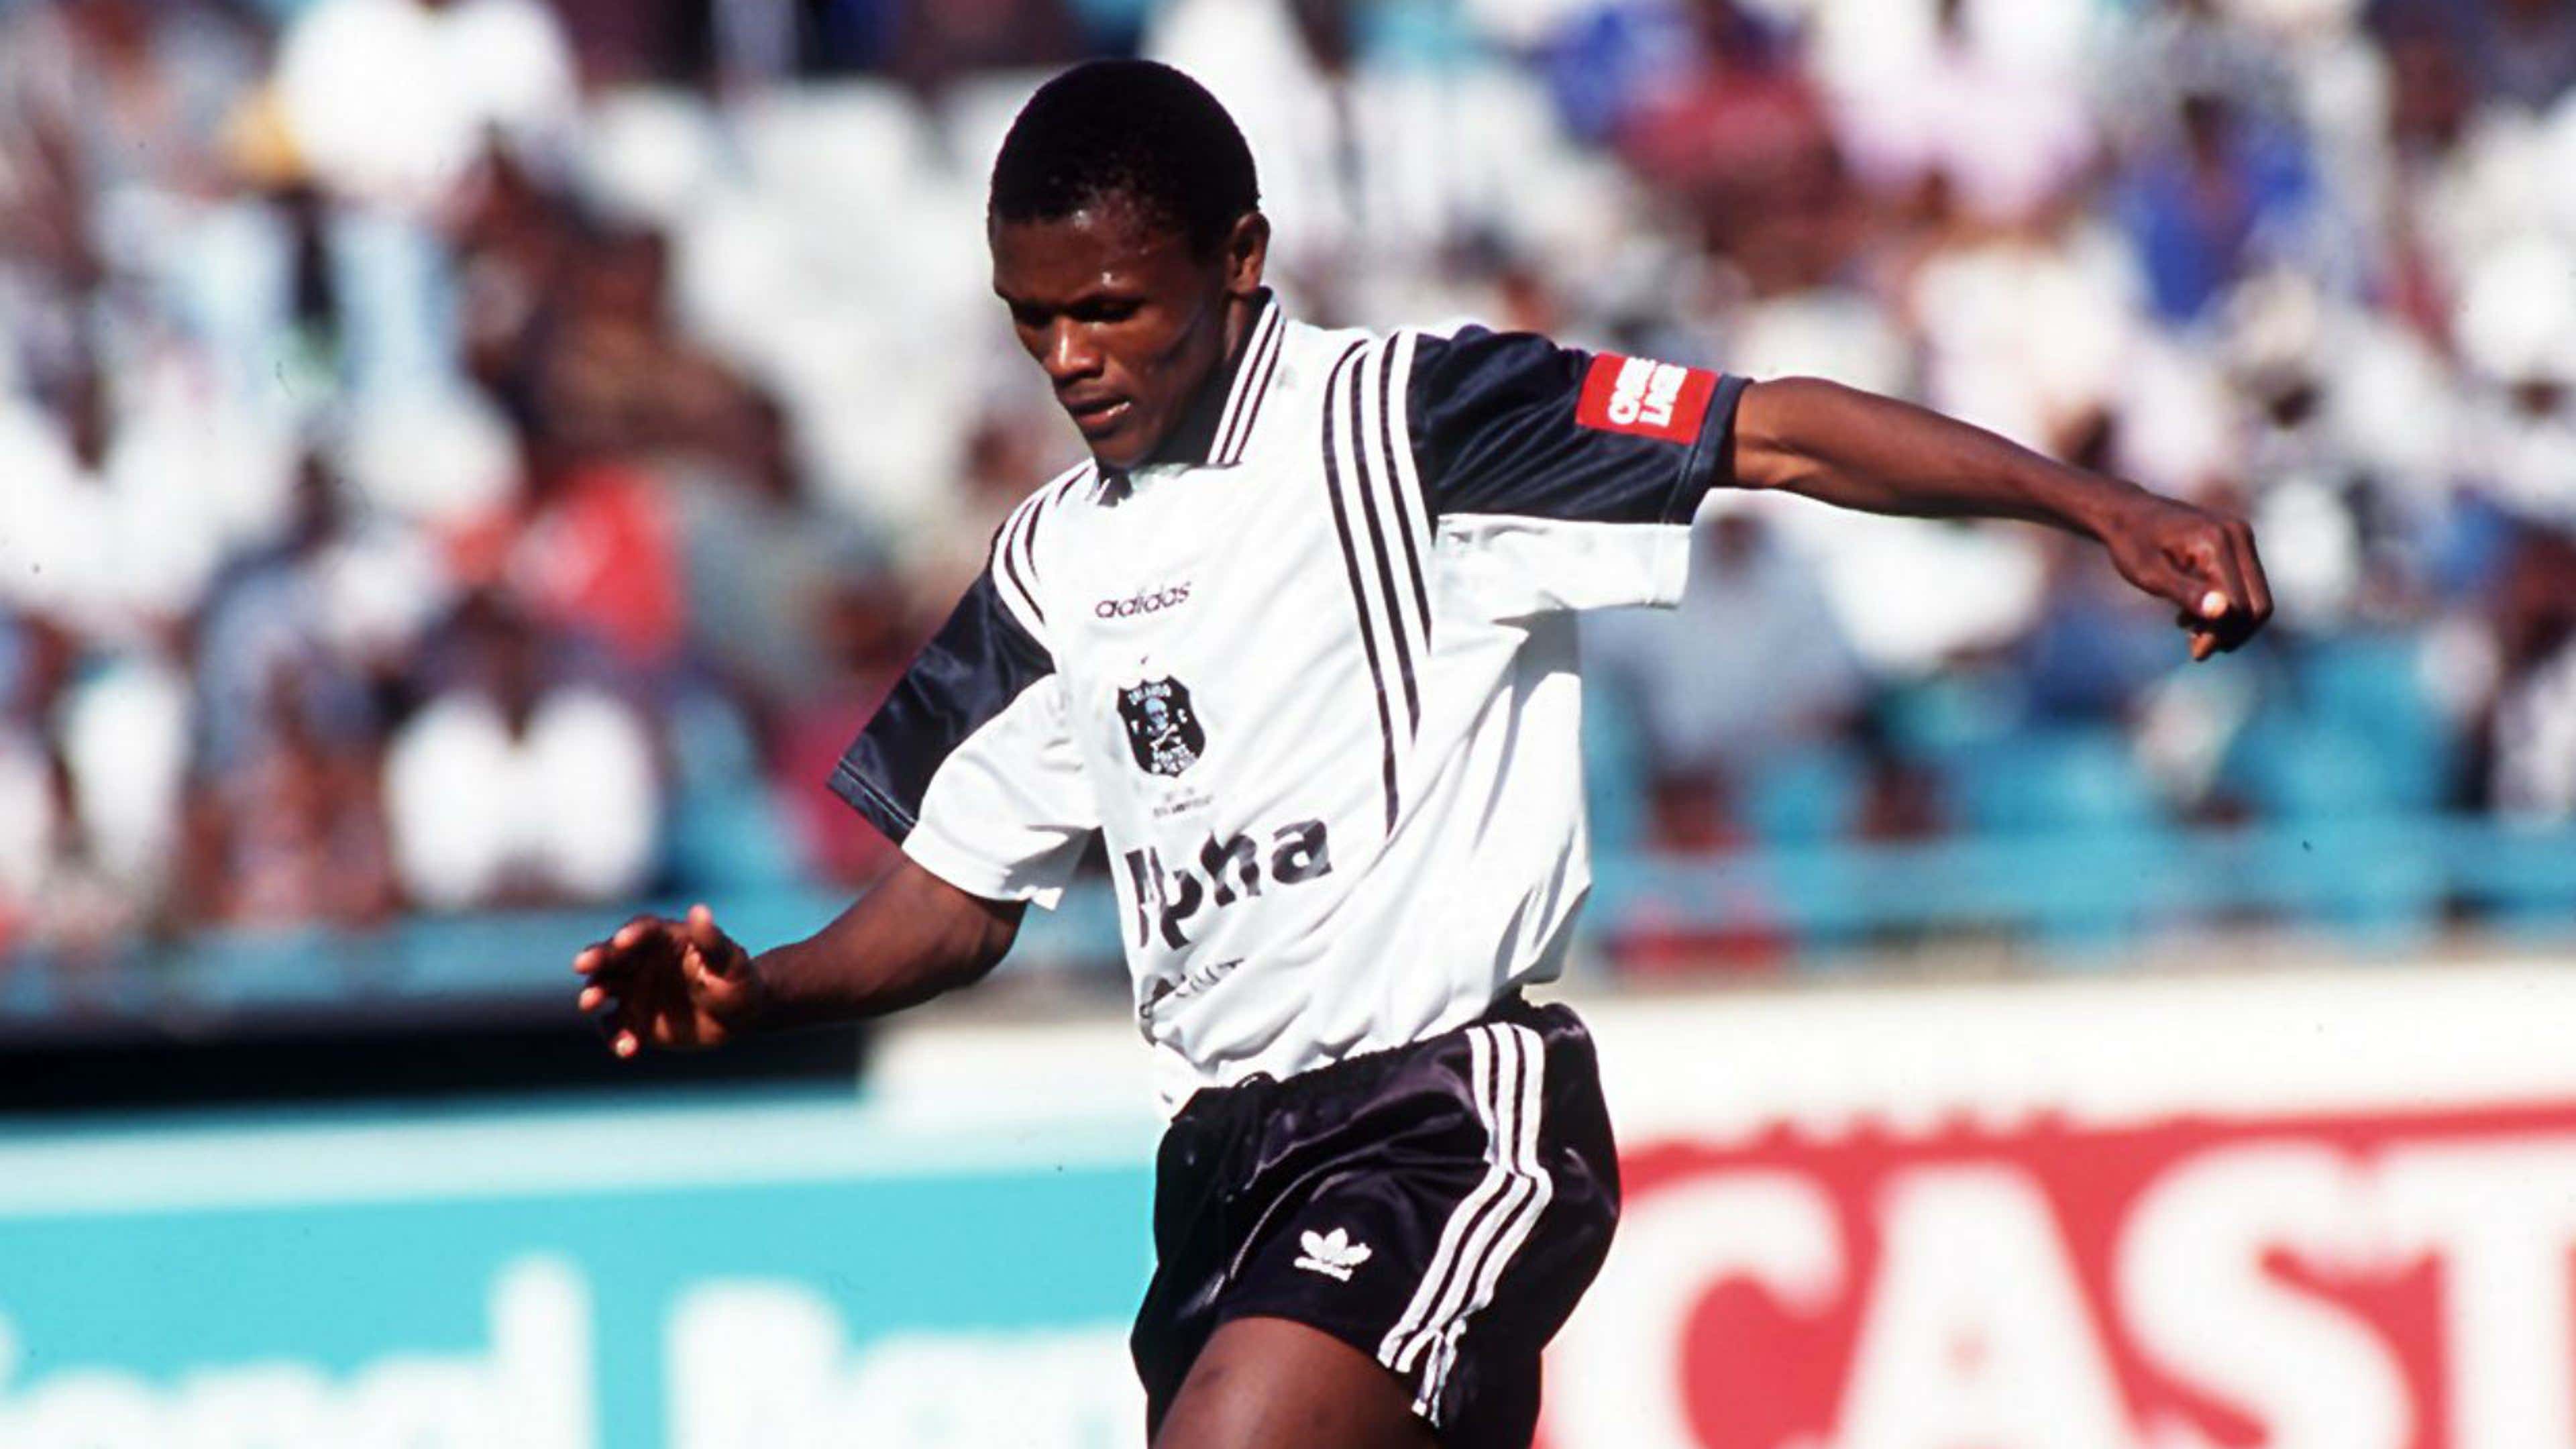 John Moeti: It would be nice for Orlando Pirates to win the league title